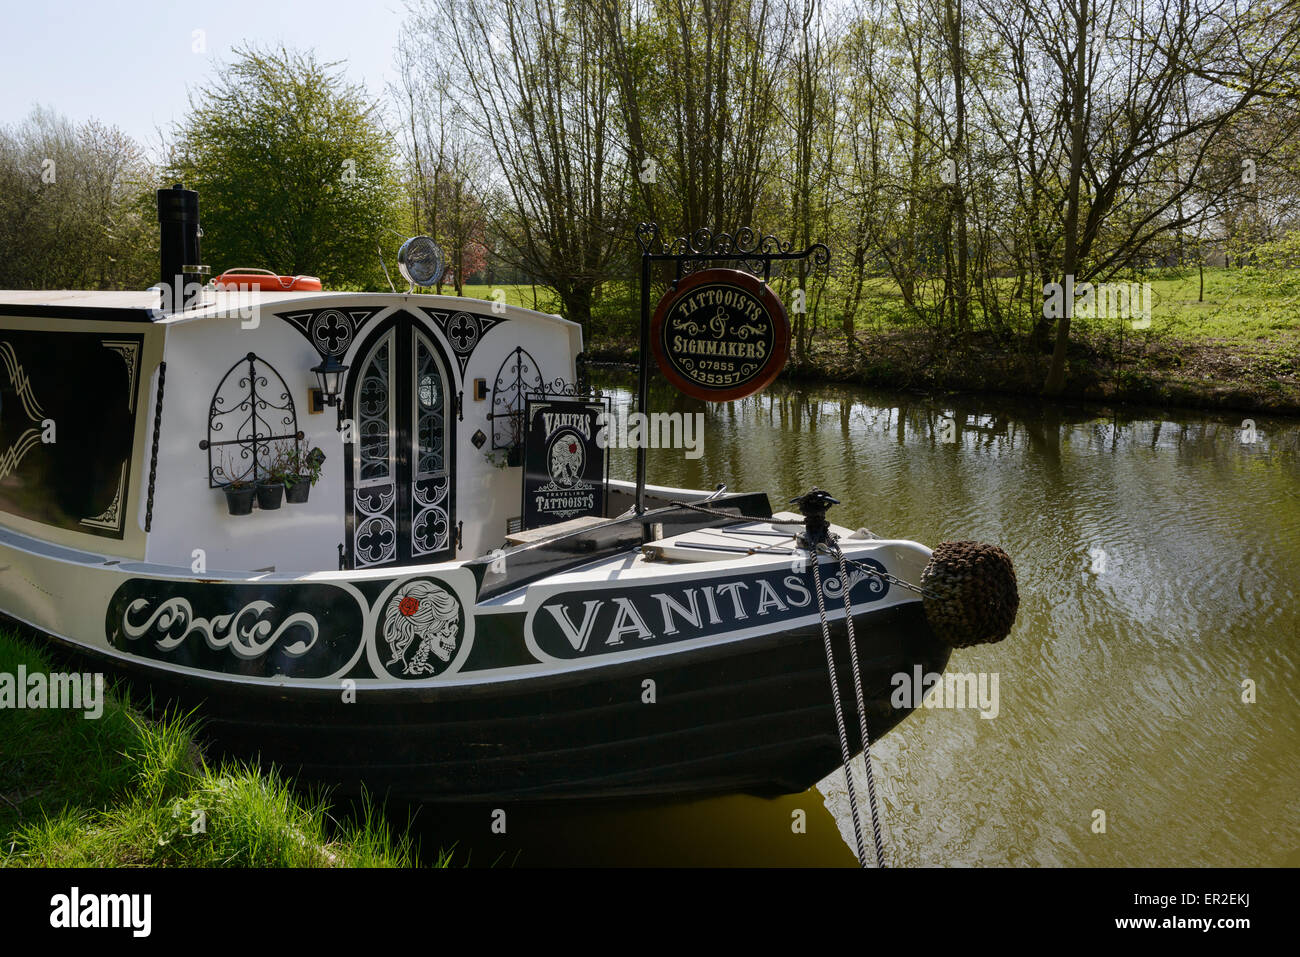 Vanitas Tattooist and Signmaker a roving trader on the Grand Union Canal. Stock Photo